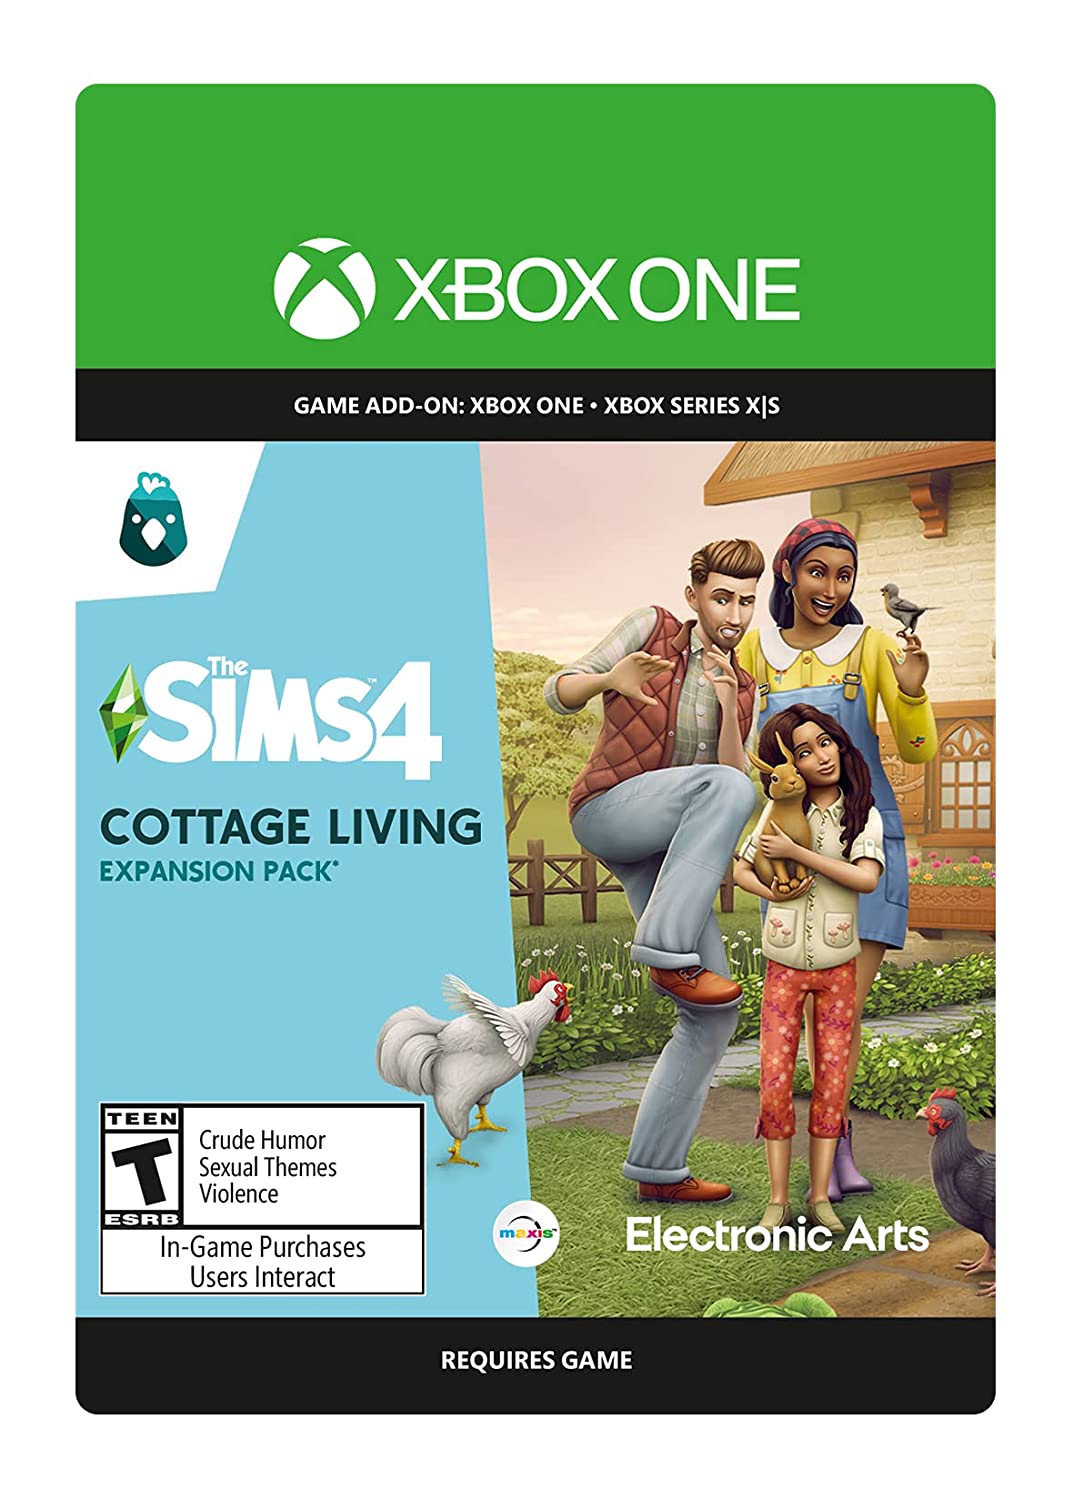 The Sims 4 Cottage Living Digital Download Key (Xbox One): VPN Activated Key